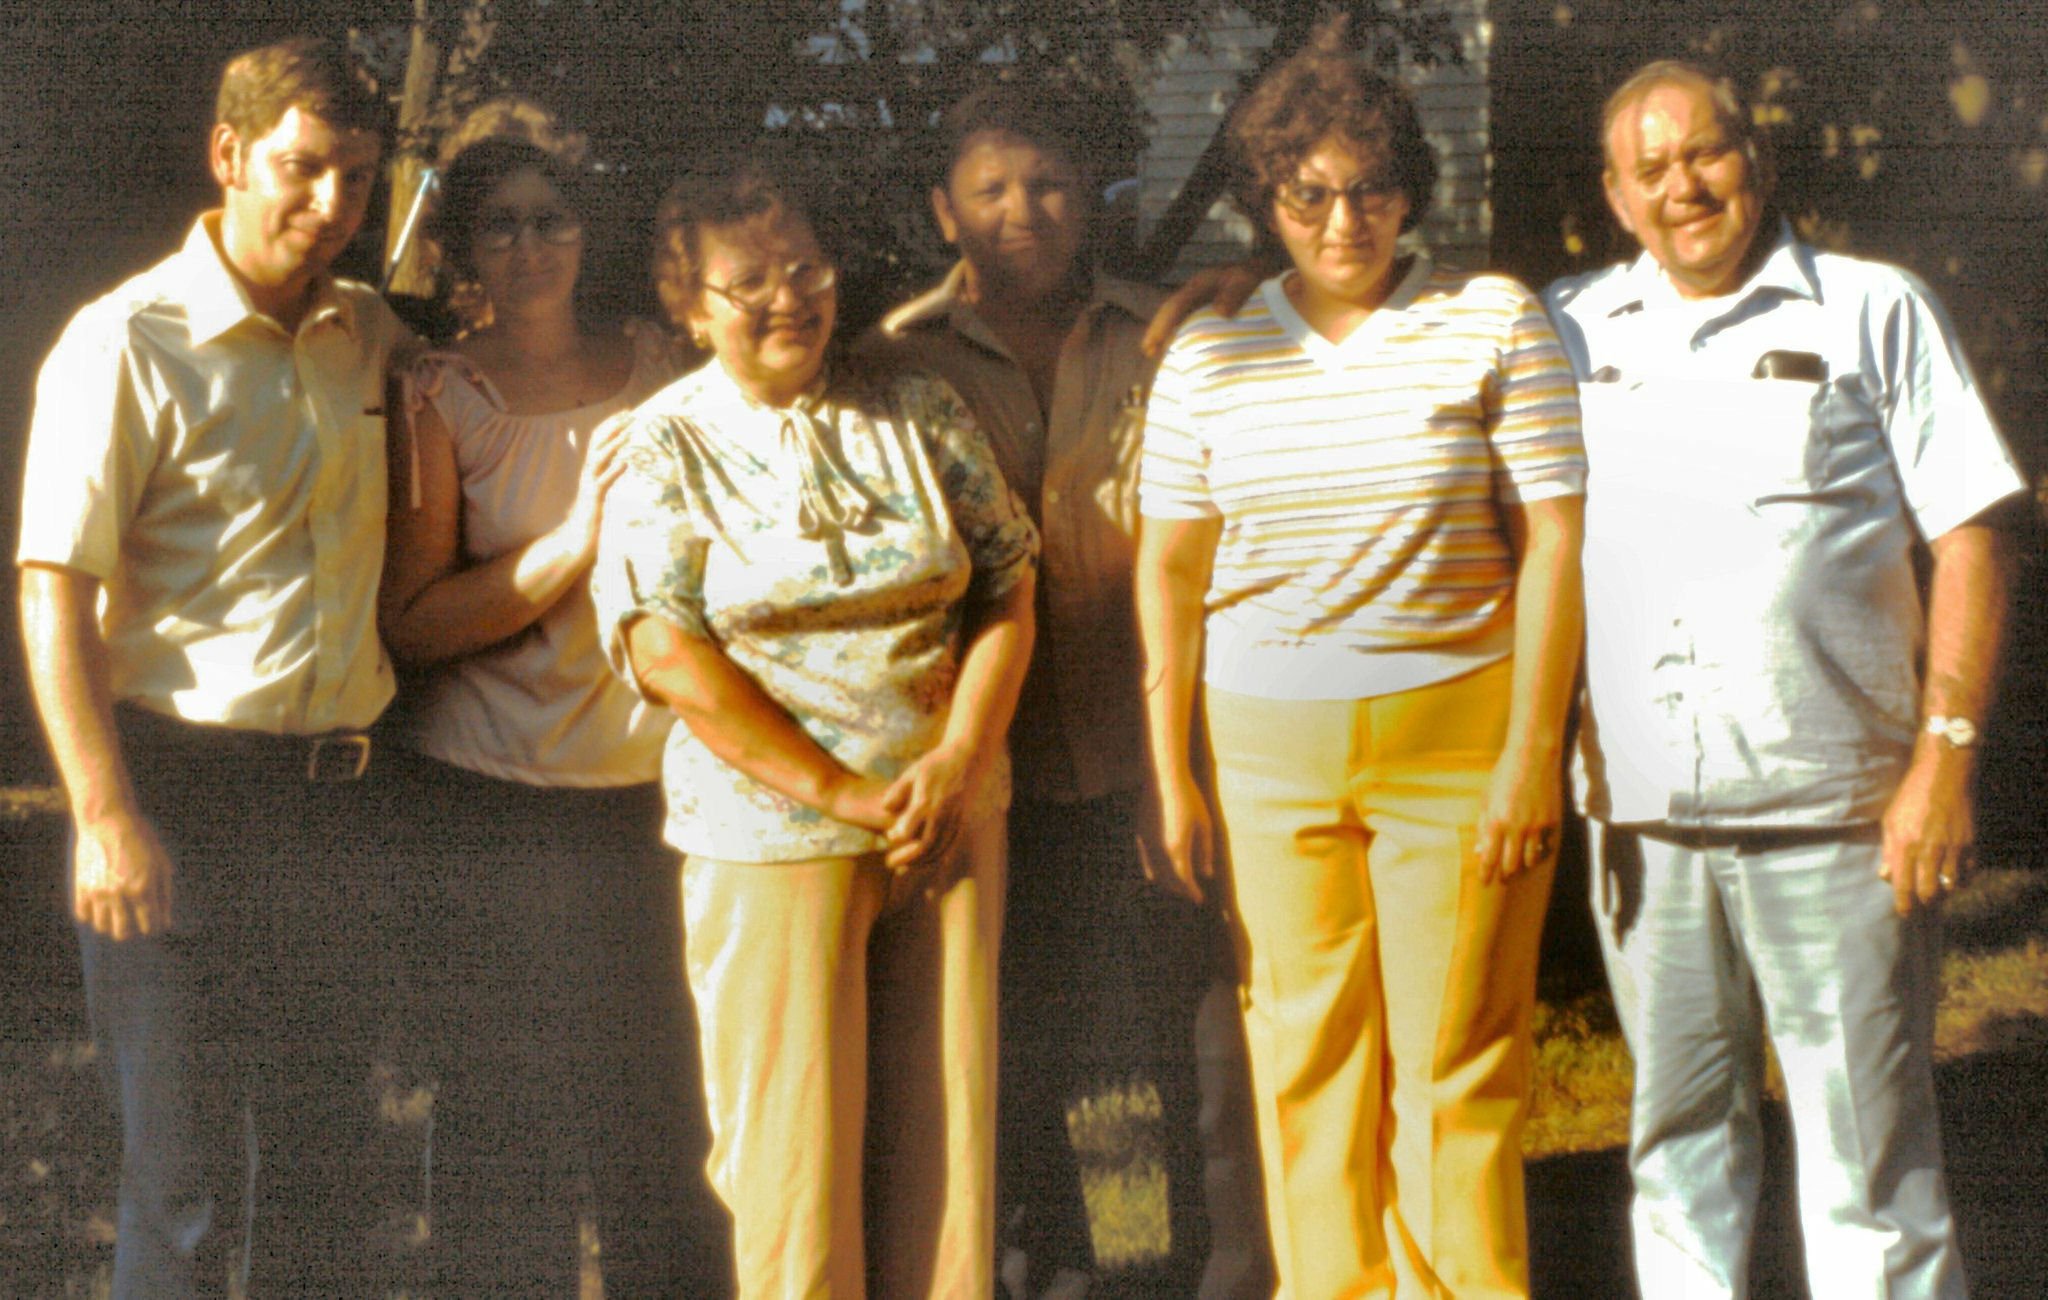  L to R, Darrel, his Sister Arline, Mother Florence, Brother Jim, Sister Gayla, and Dad, Earl, 1975. 